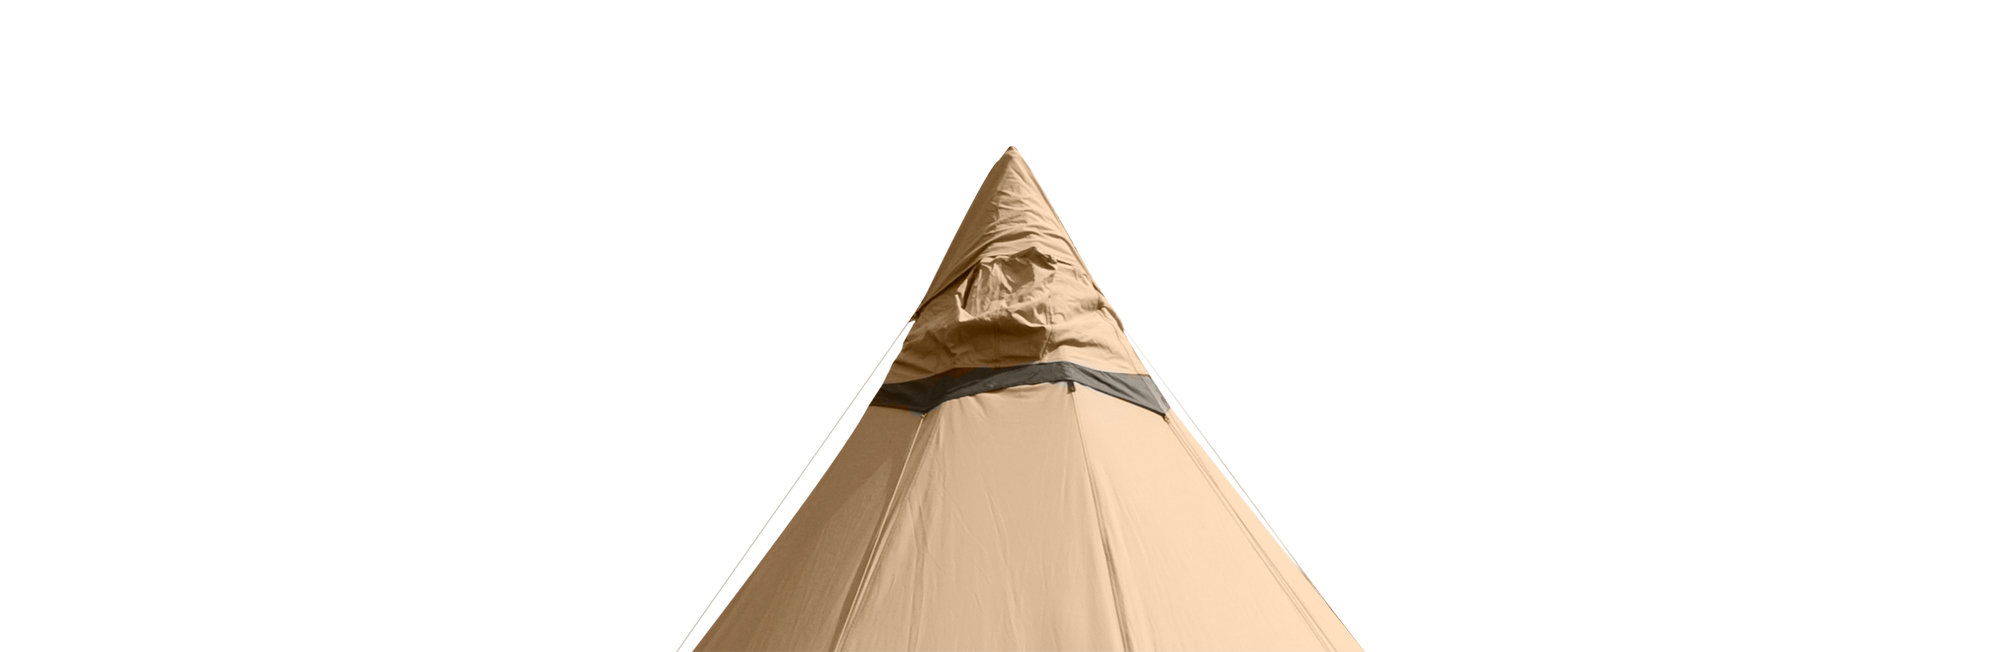 How to use the double ventilator cap on a Nordic tipi